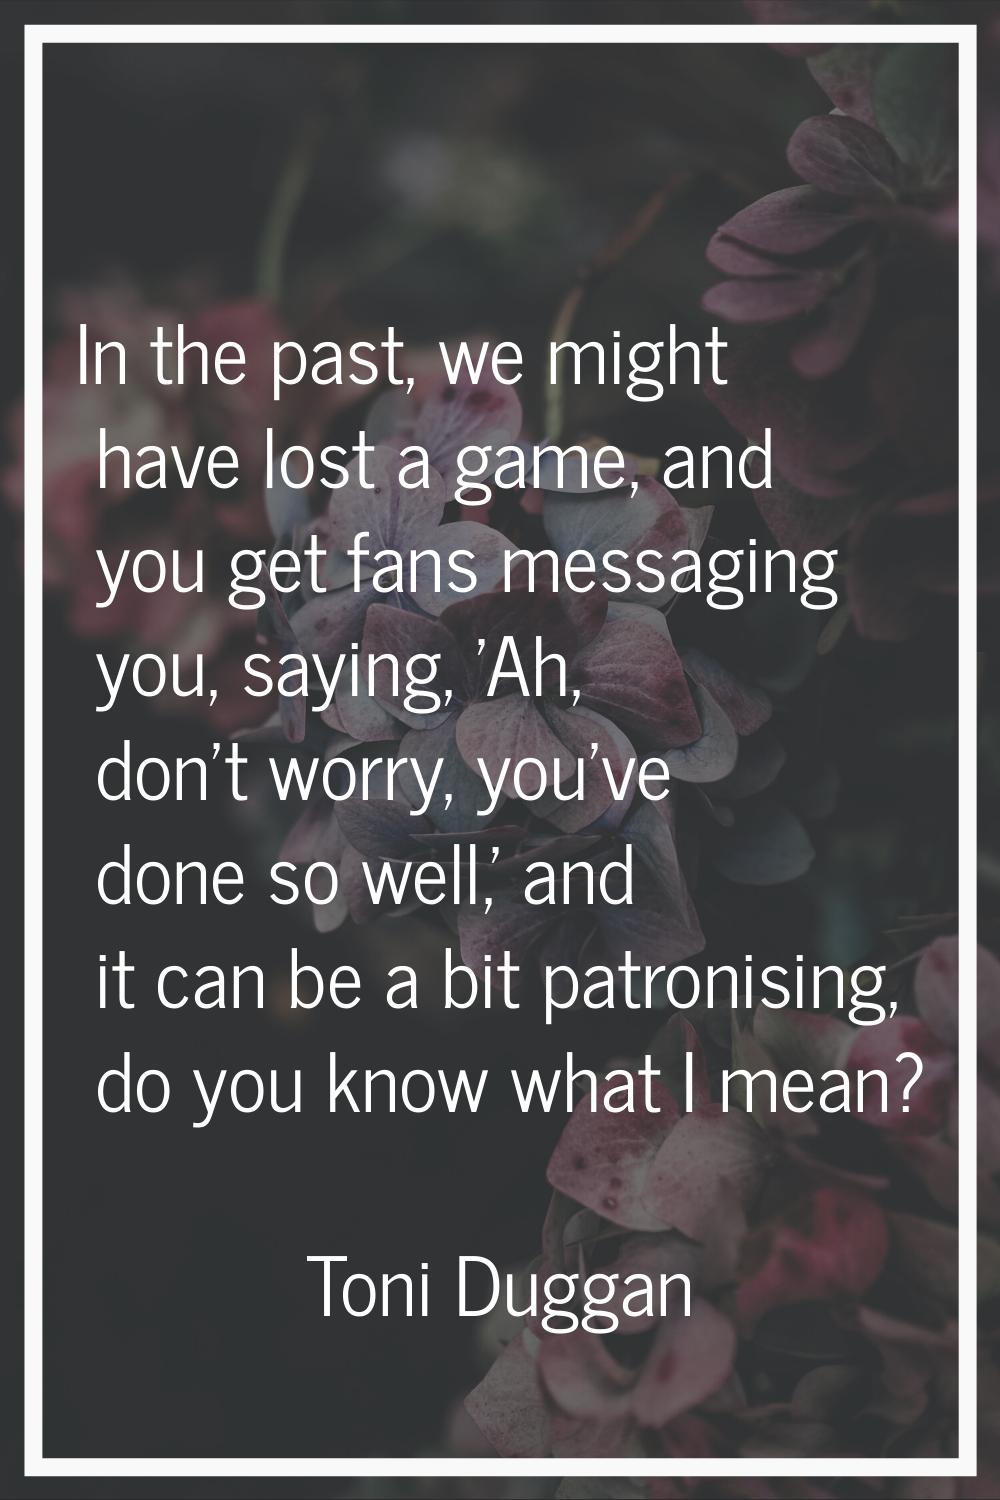 In the past, we might have lost a game, and you get fans messaging you, saying, 'Ah, don't worry, y